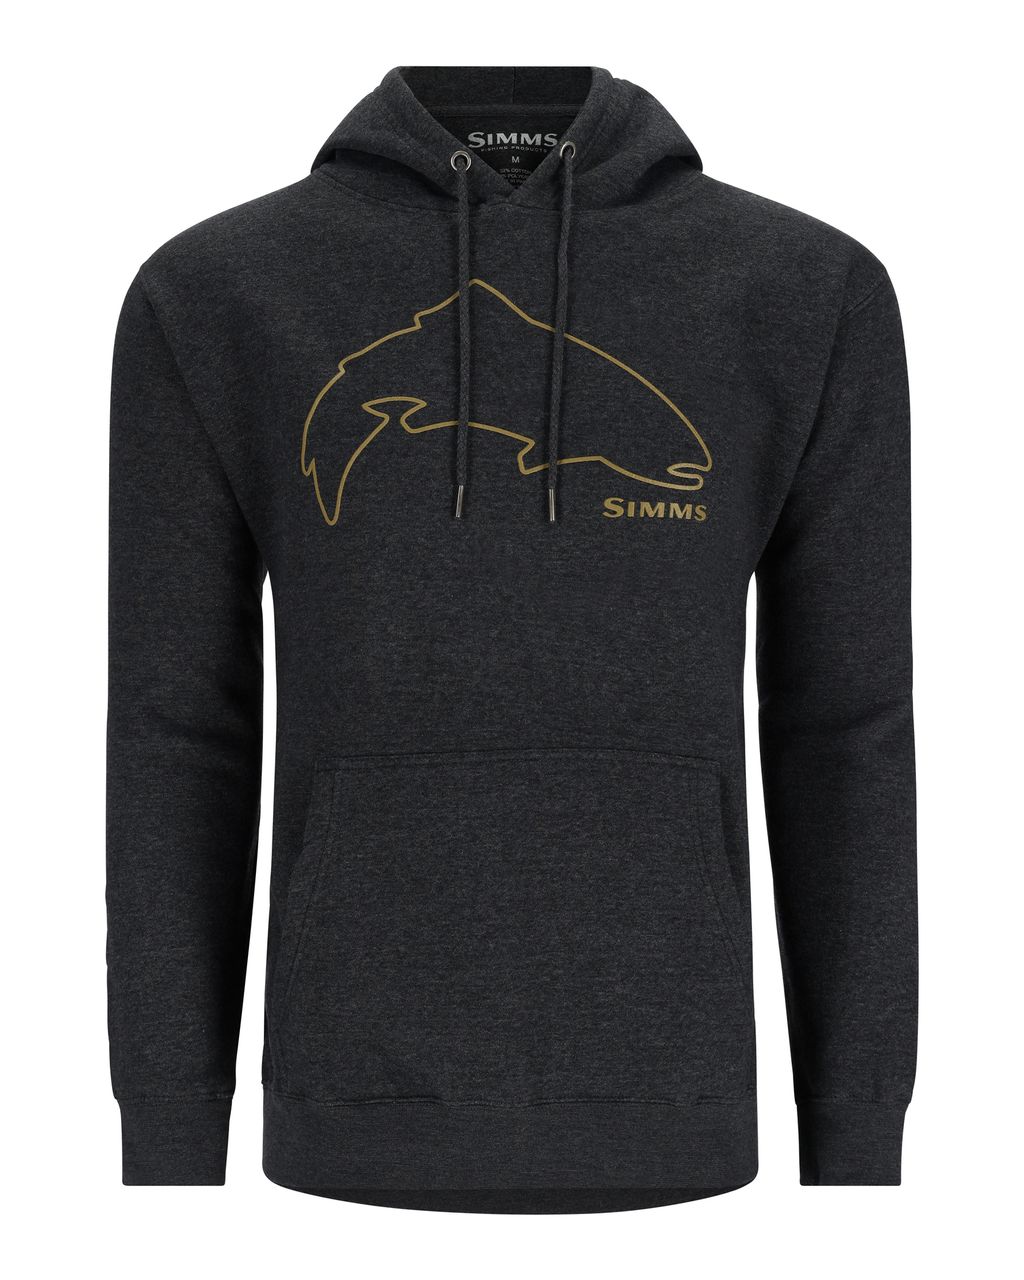 Simms TRout Outline Hoody